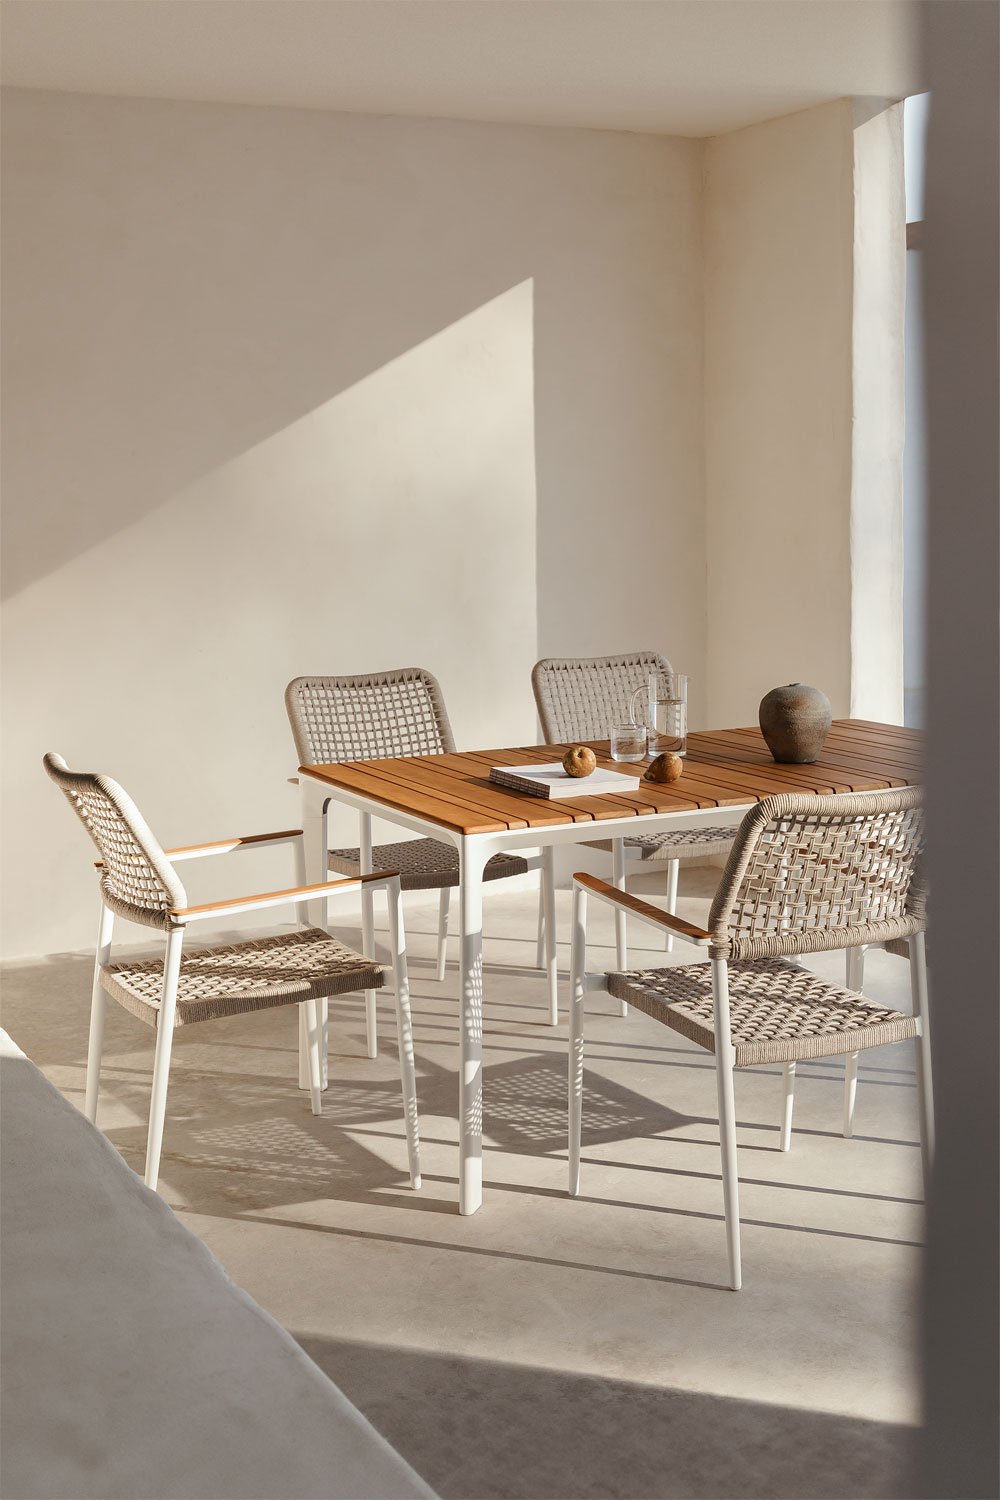 Katiana Rectangular Table Set in Aluminum and Teak Wood (160x90 cm) and 6 Garden Chairs in Aluminum and Braided Rope N, gallery image 1